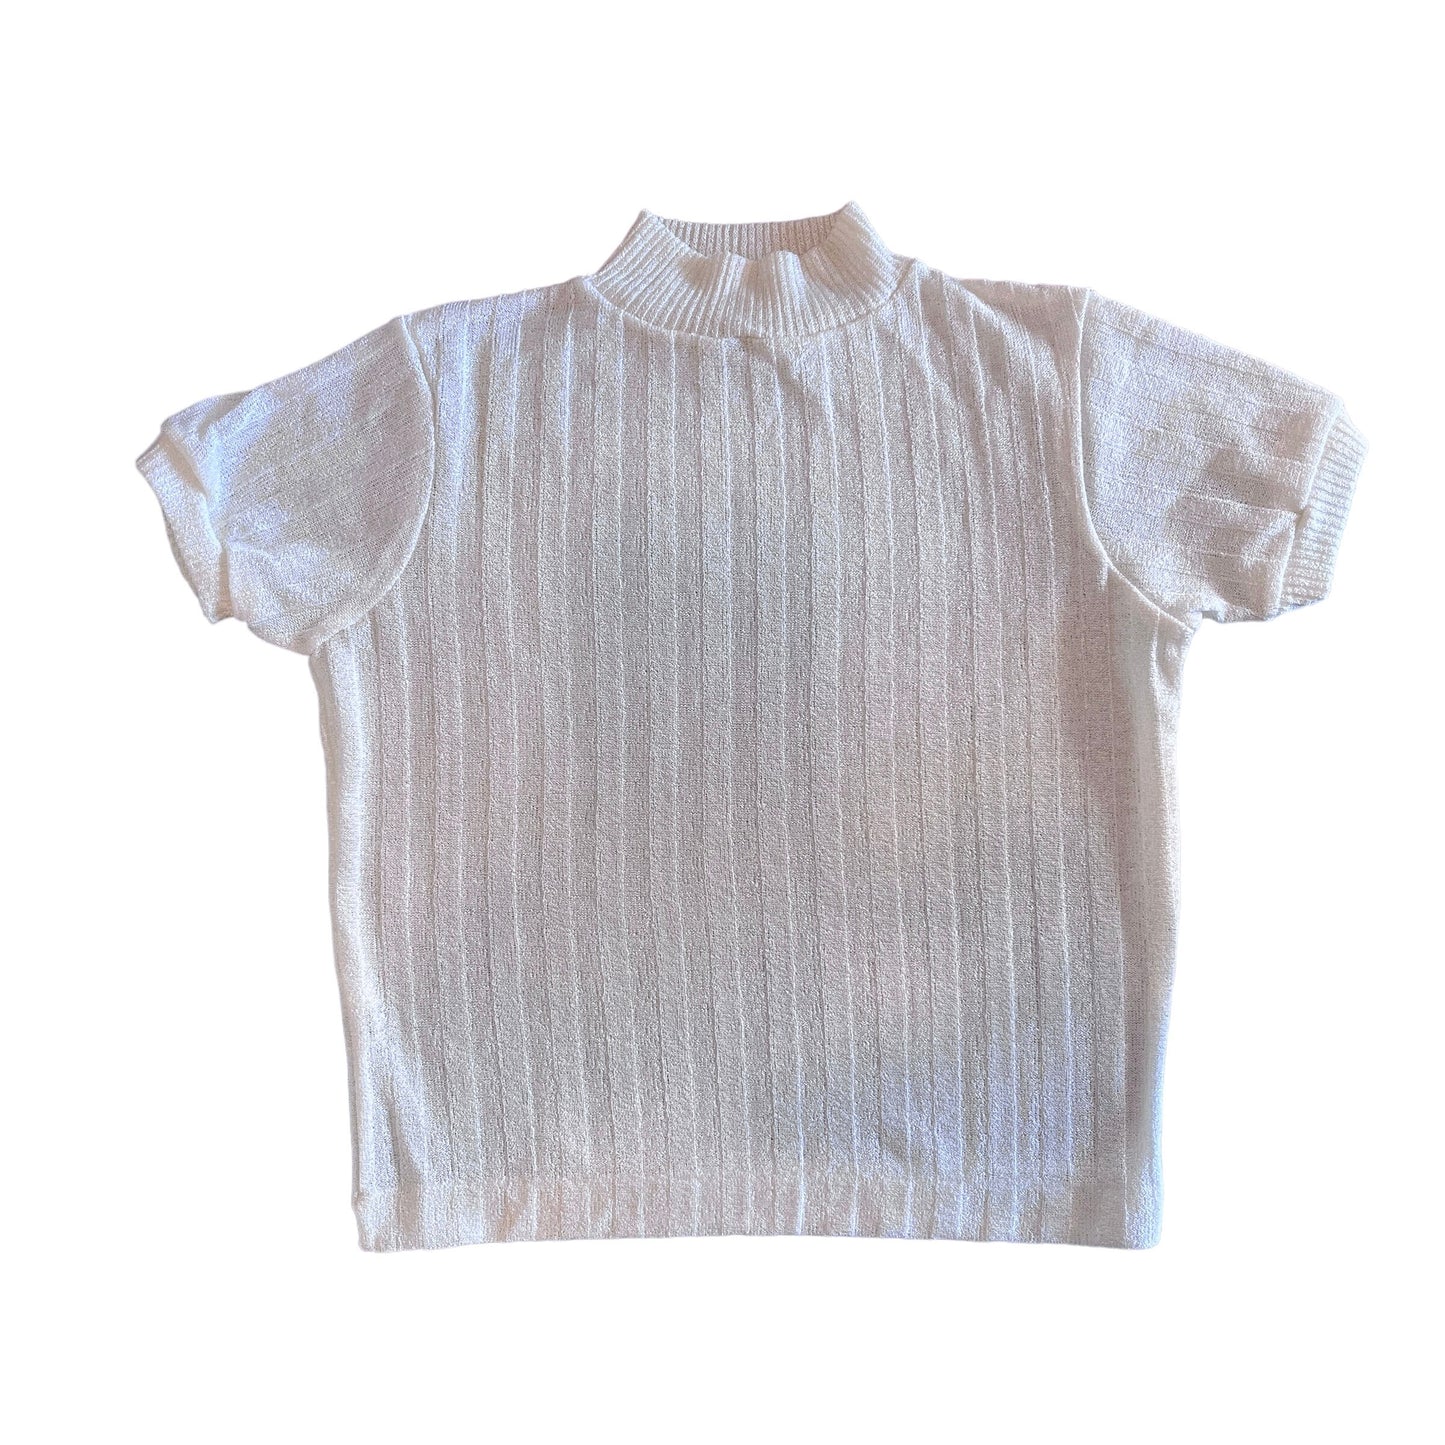 1960's Ivory Sparkly Top /Tee 6-8Y